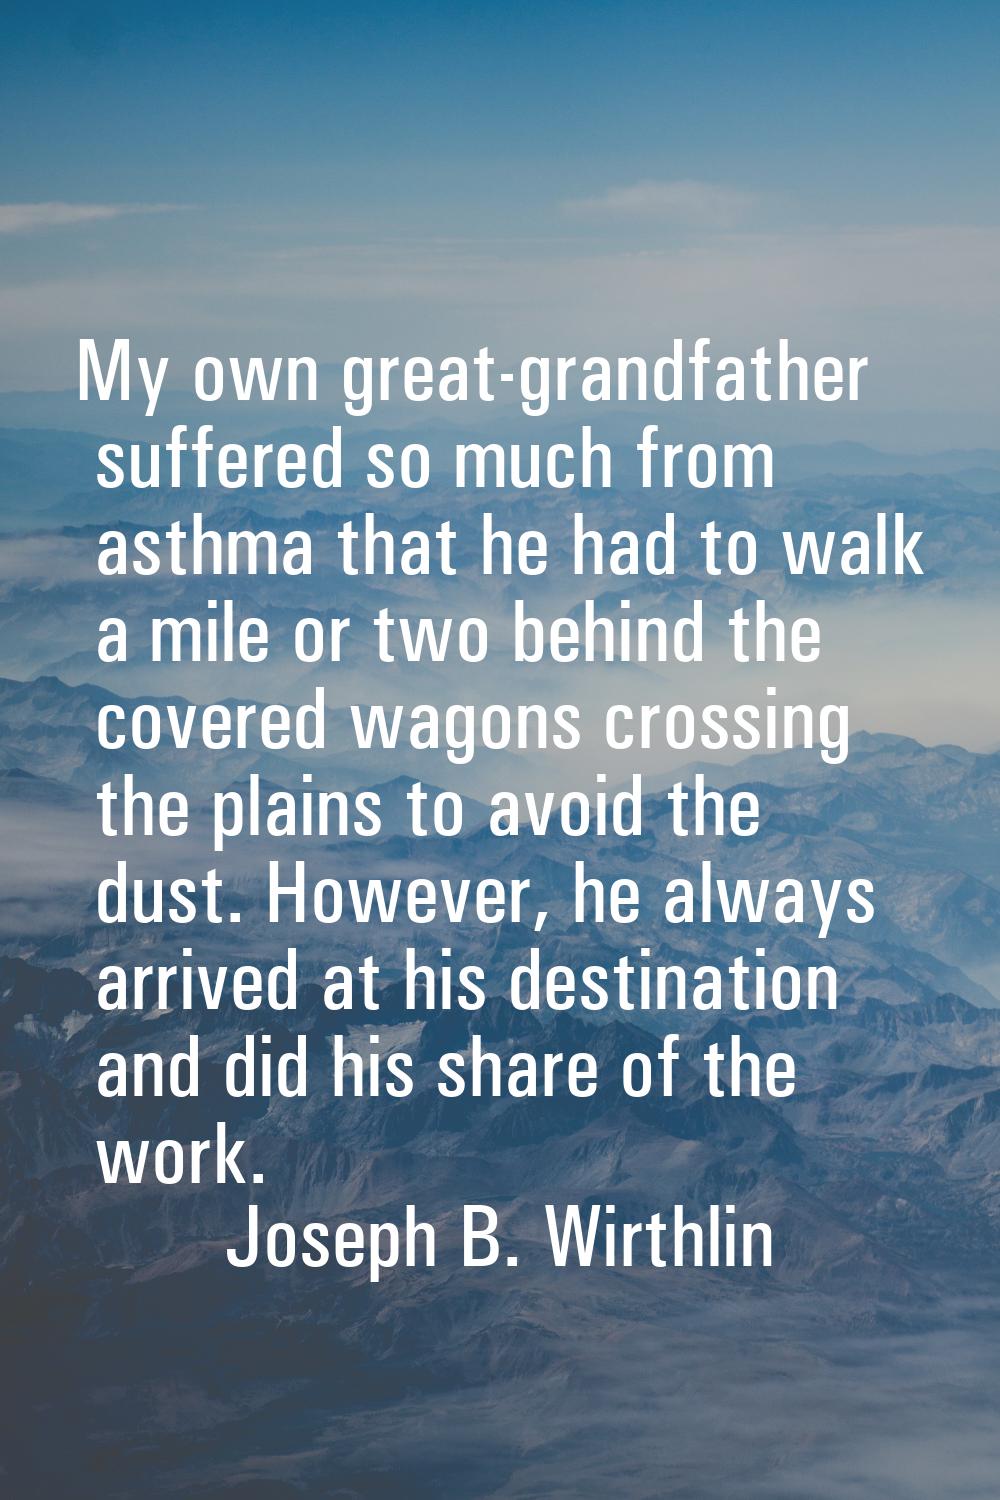 My own great-grandfather suffered so much from asthma that he had to walk a mile or two behind the 